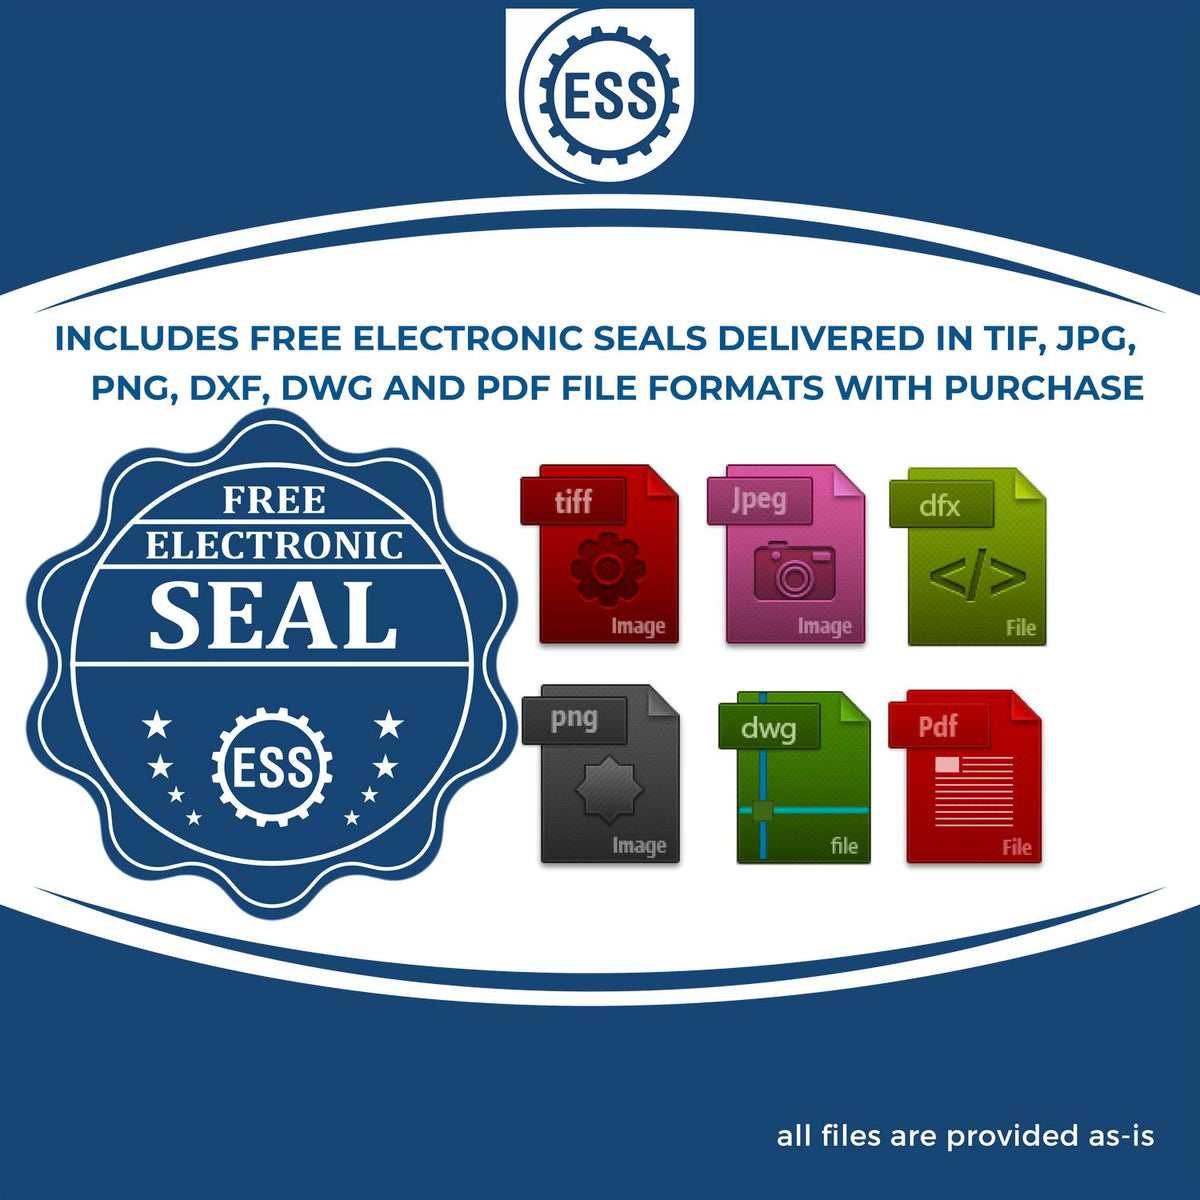 An infographic for the free electronic seal for the Soft Missouri Professional Engineer Seal illustrating the different file type icons such as DXF, DWG, TIF, JPG and PNG.